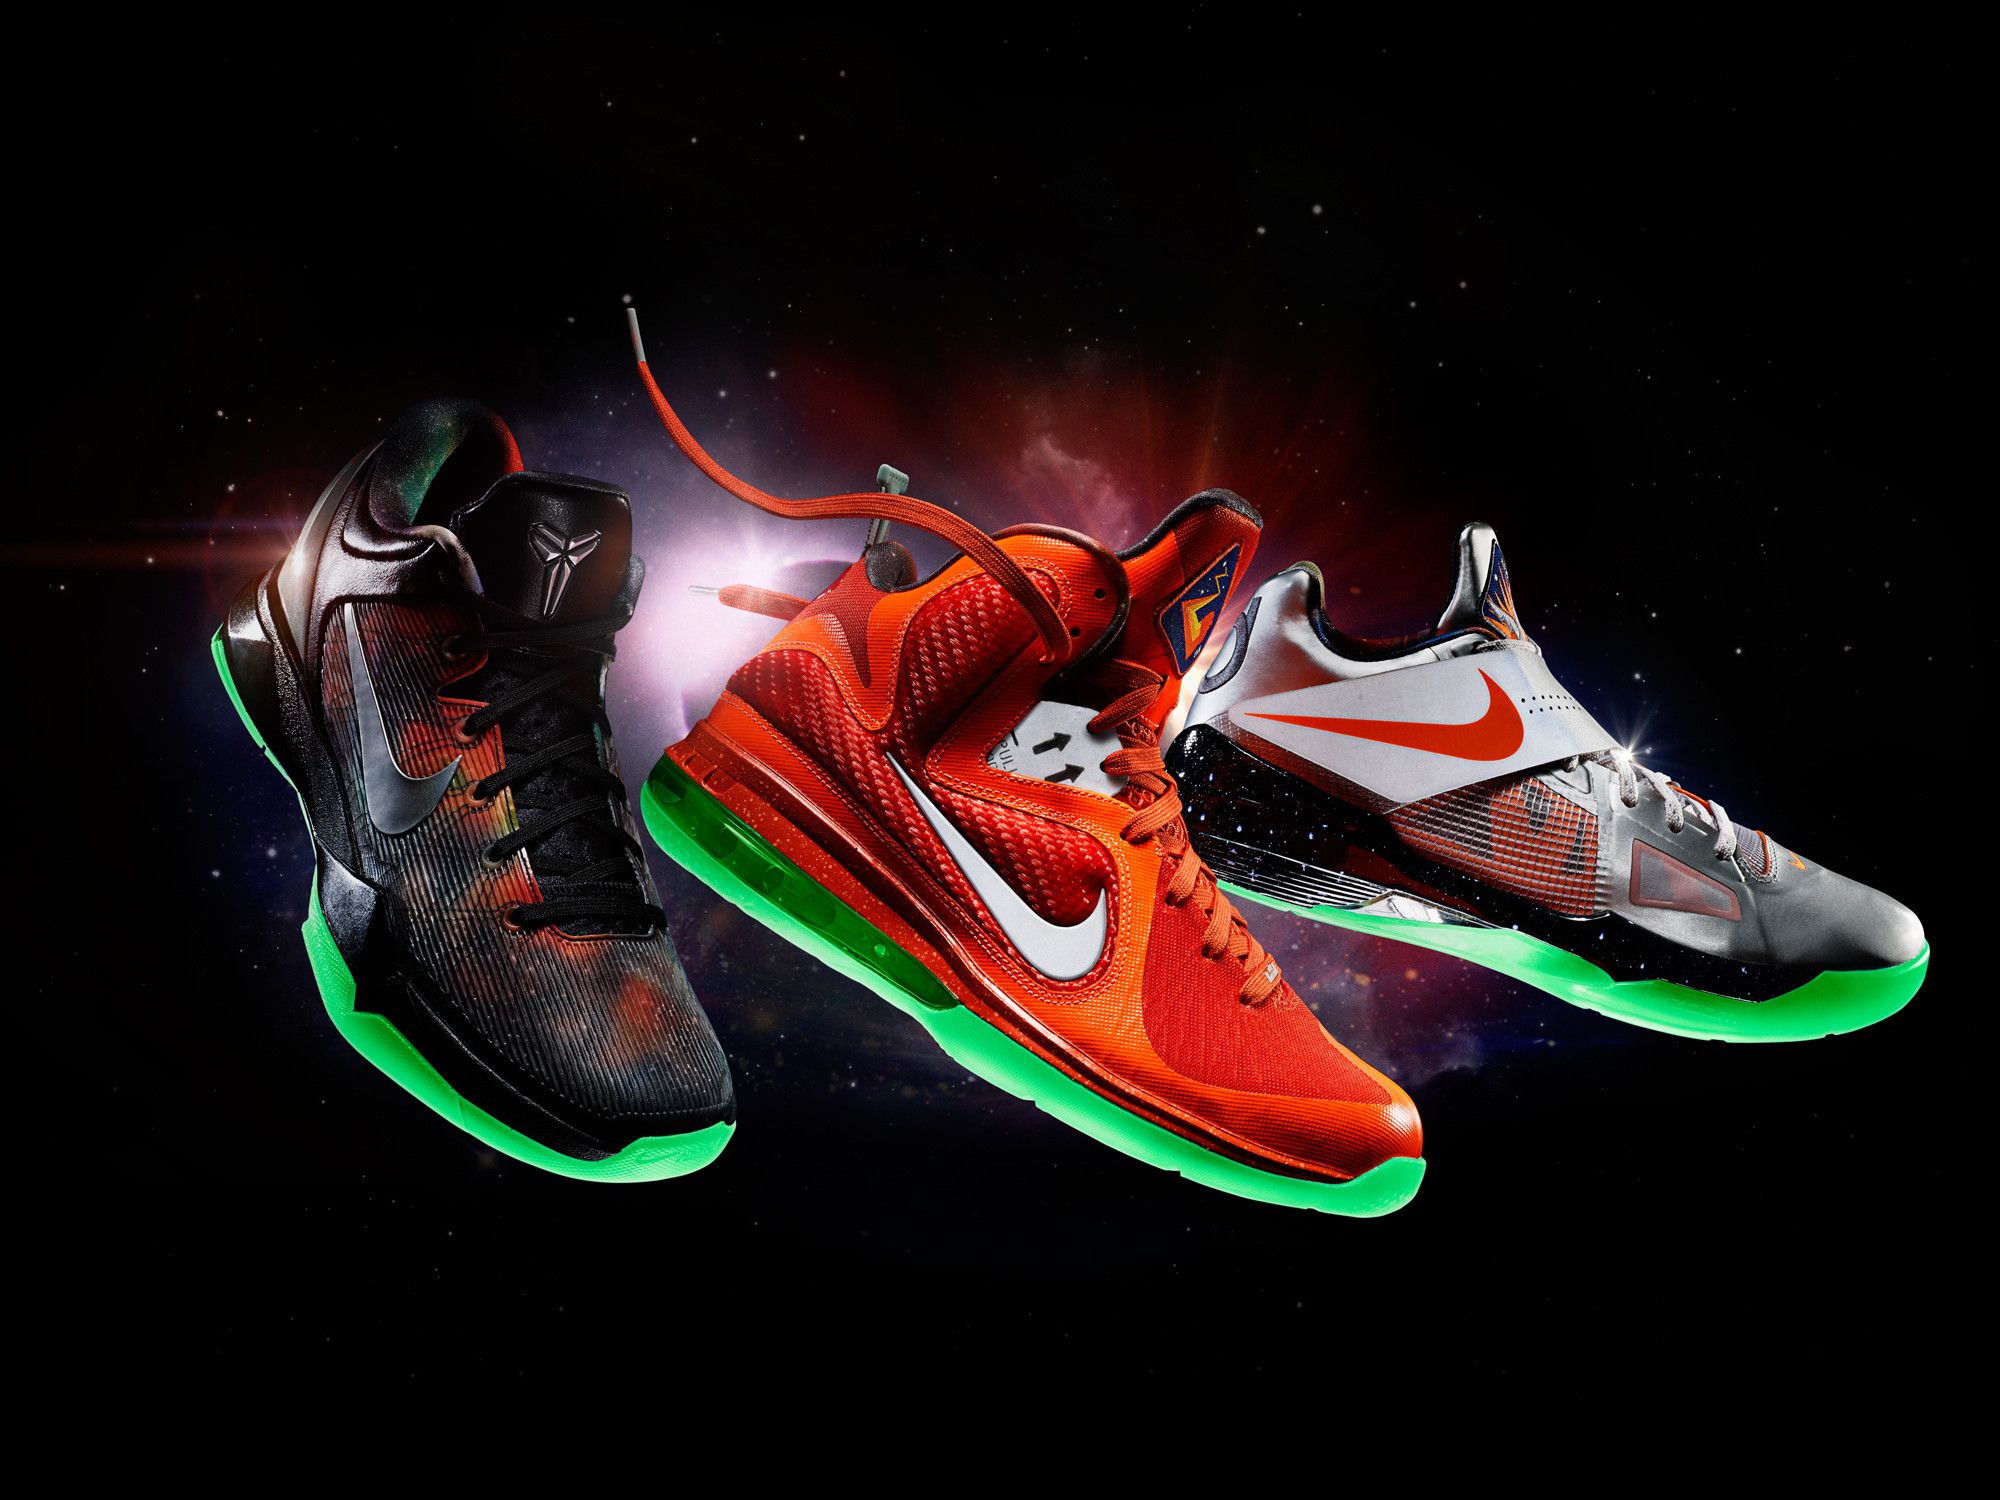 Nike Shoes Wallpaper Free Nike Shoes Background